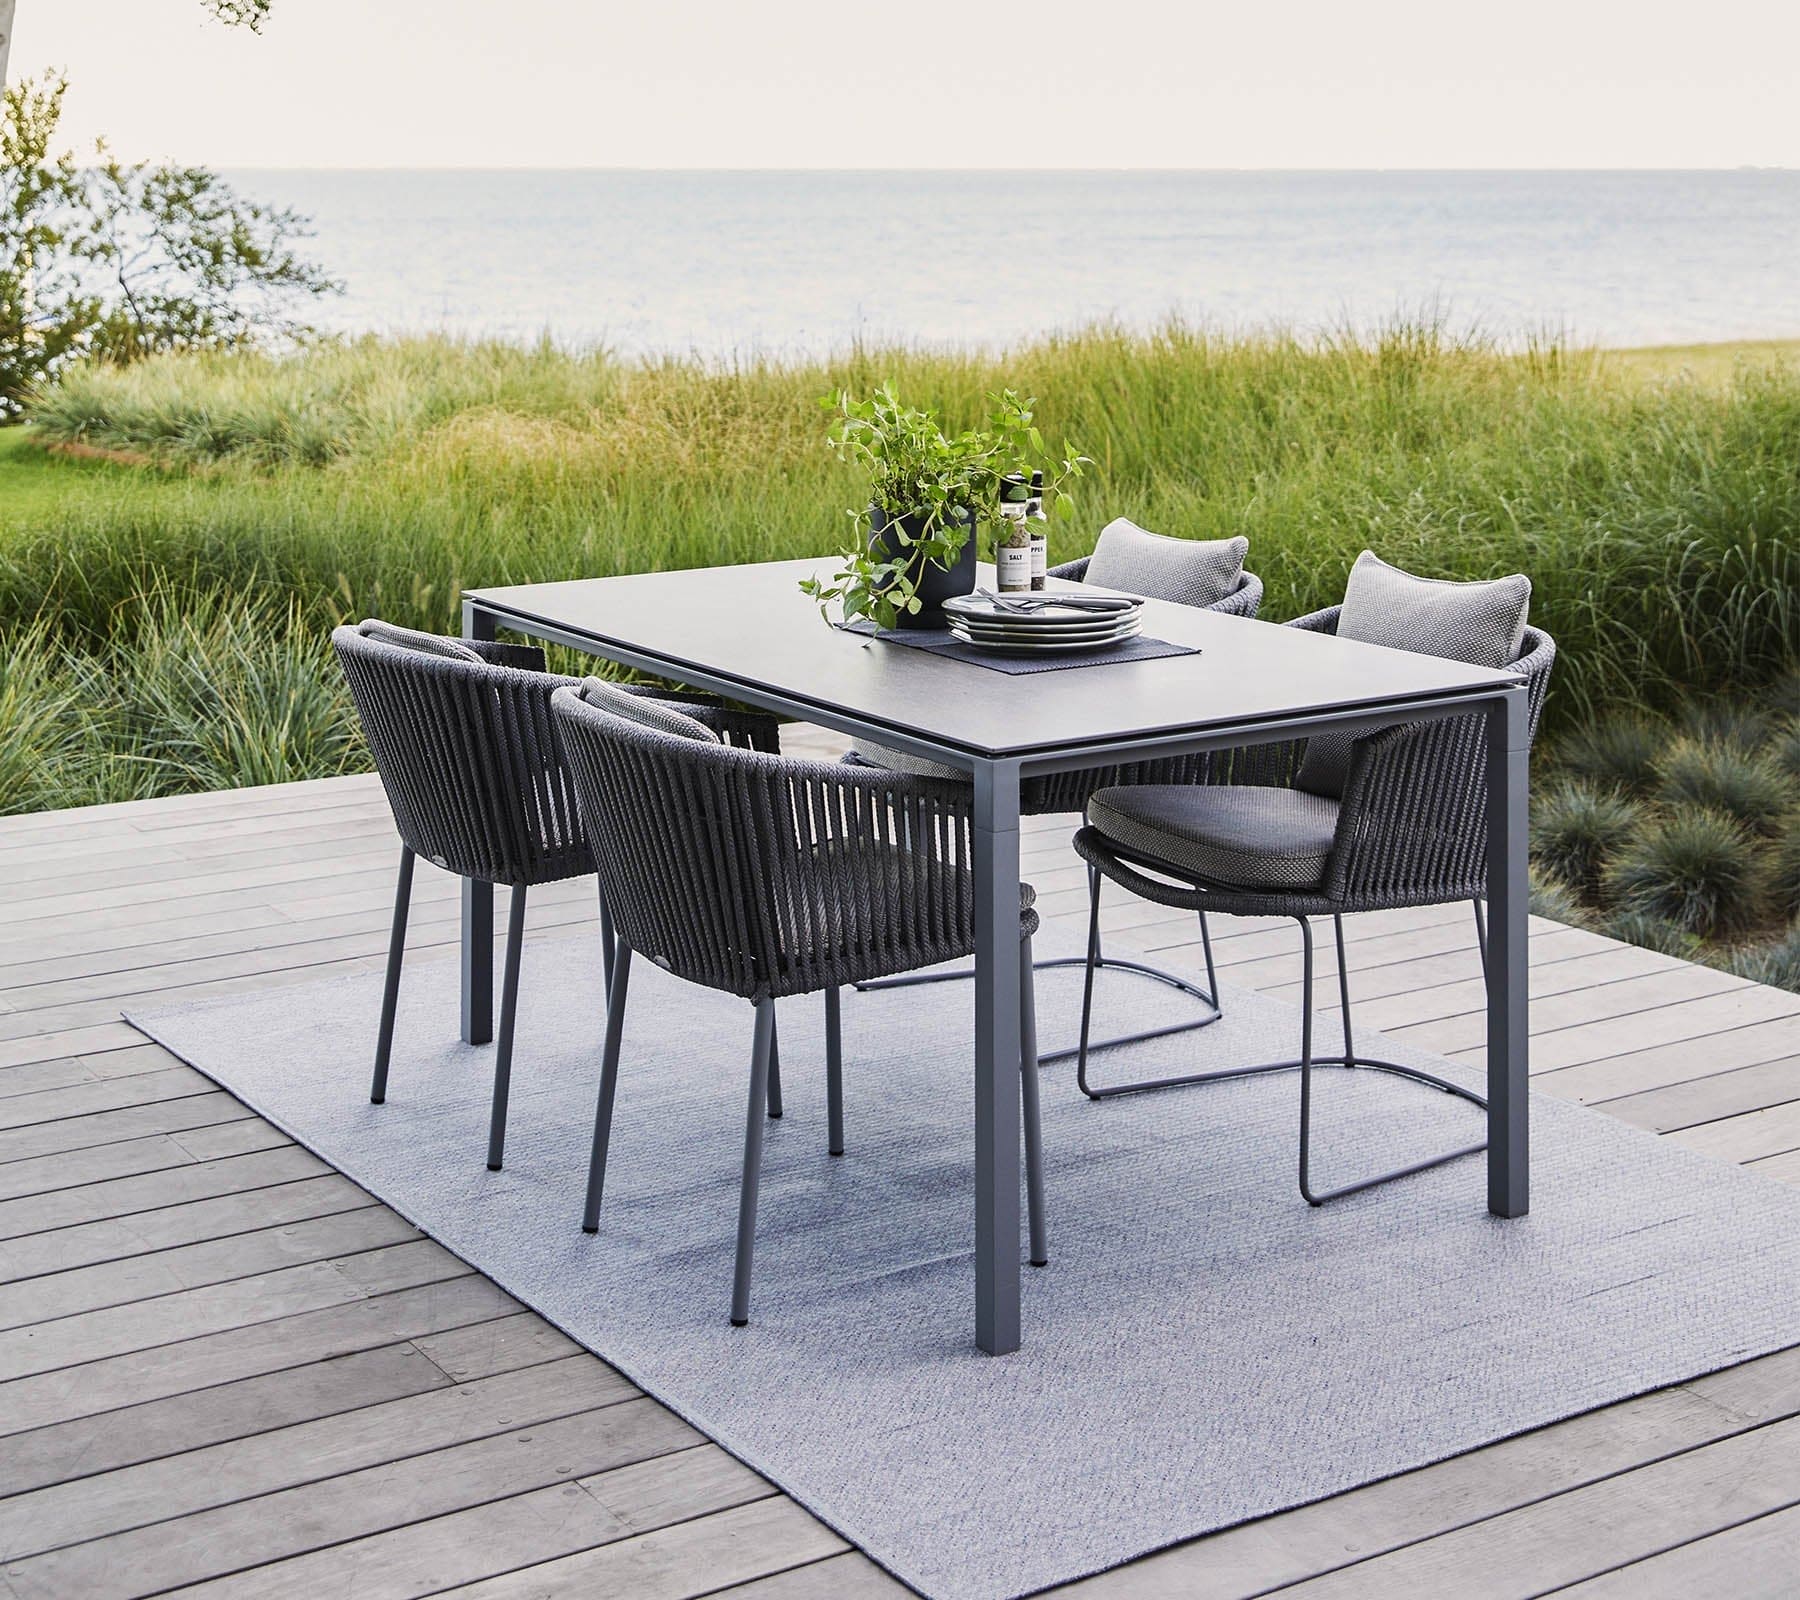 Boxhill's Pure grey aluminum outdoor dining table with grey outdoor dining chairs placed on wooden platform beside grass field